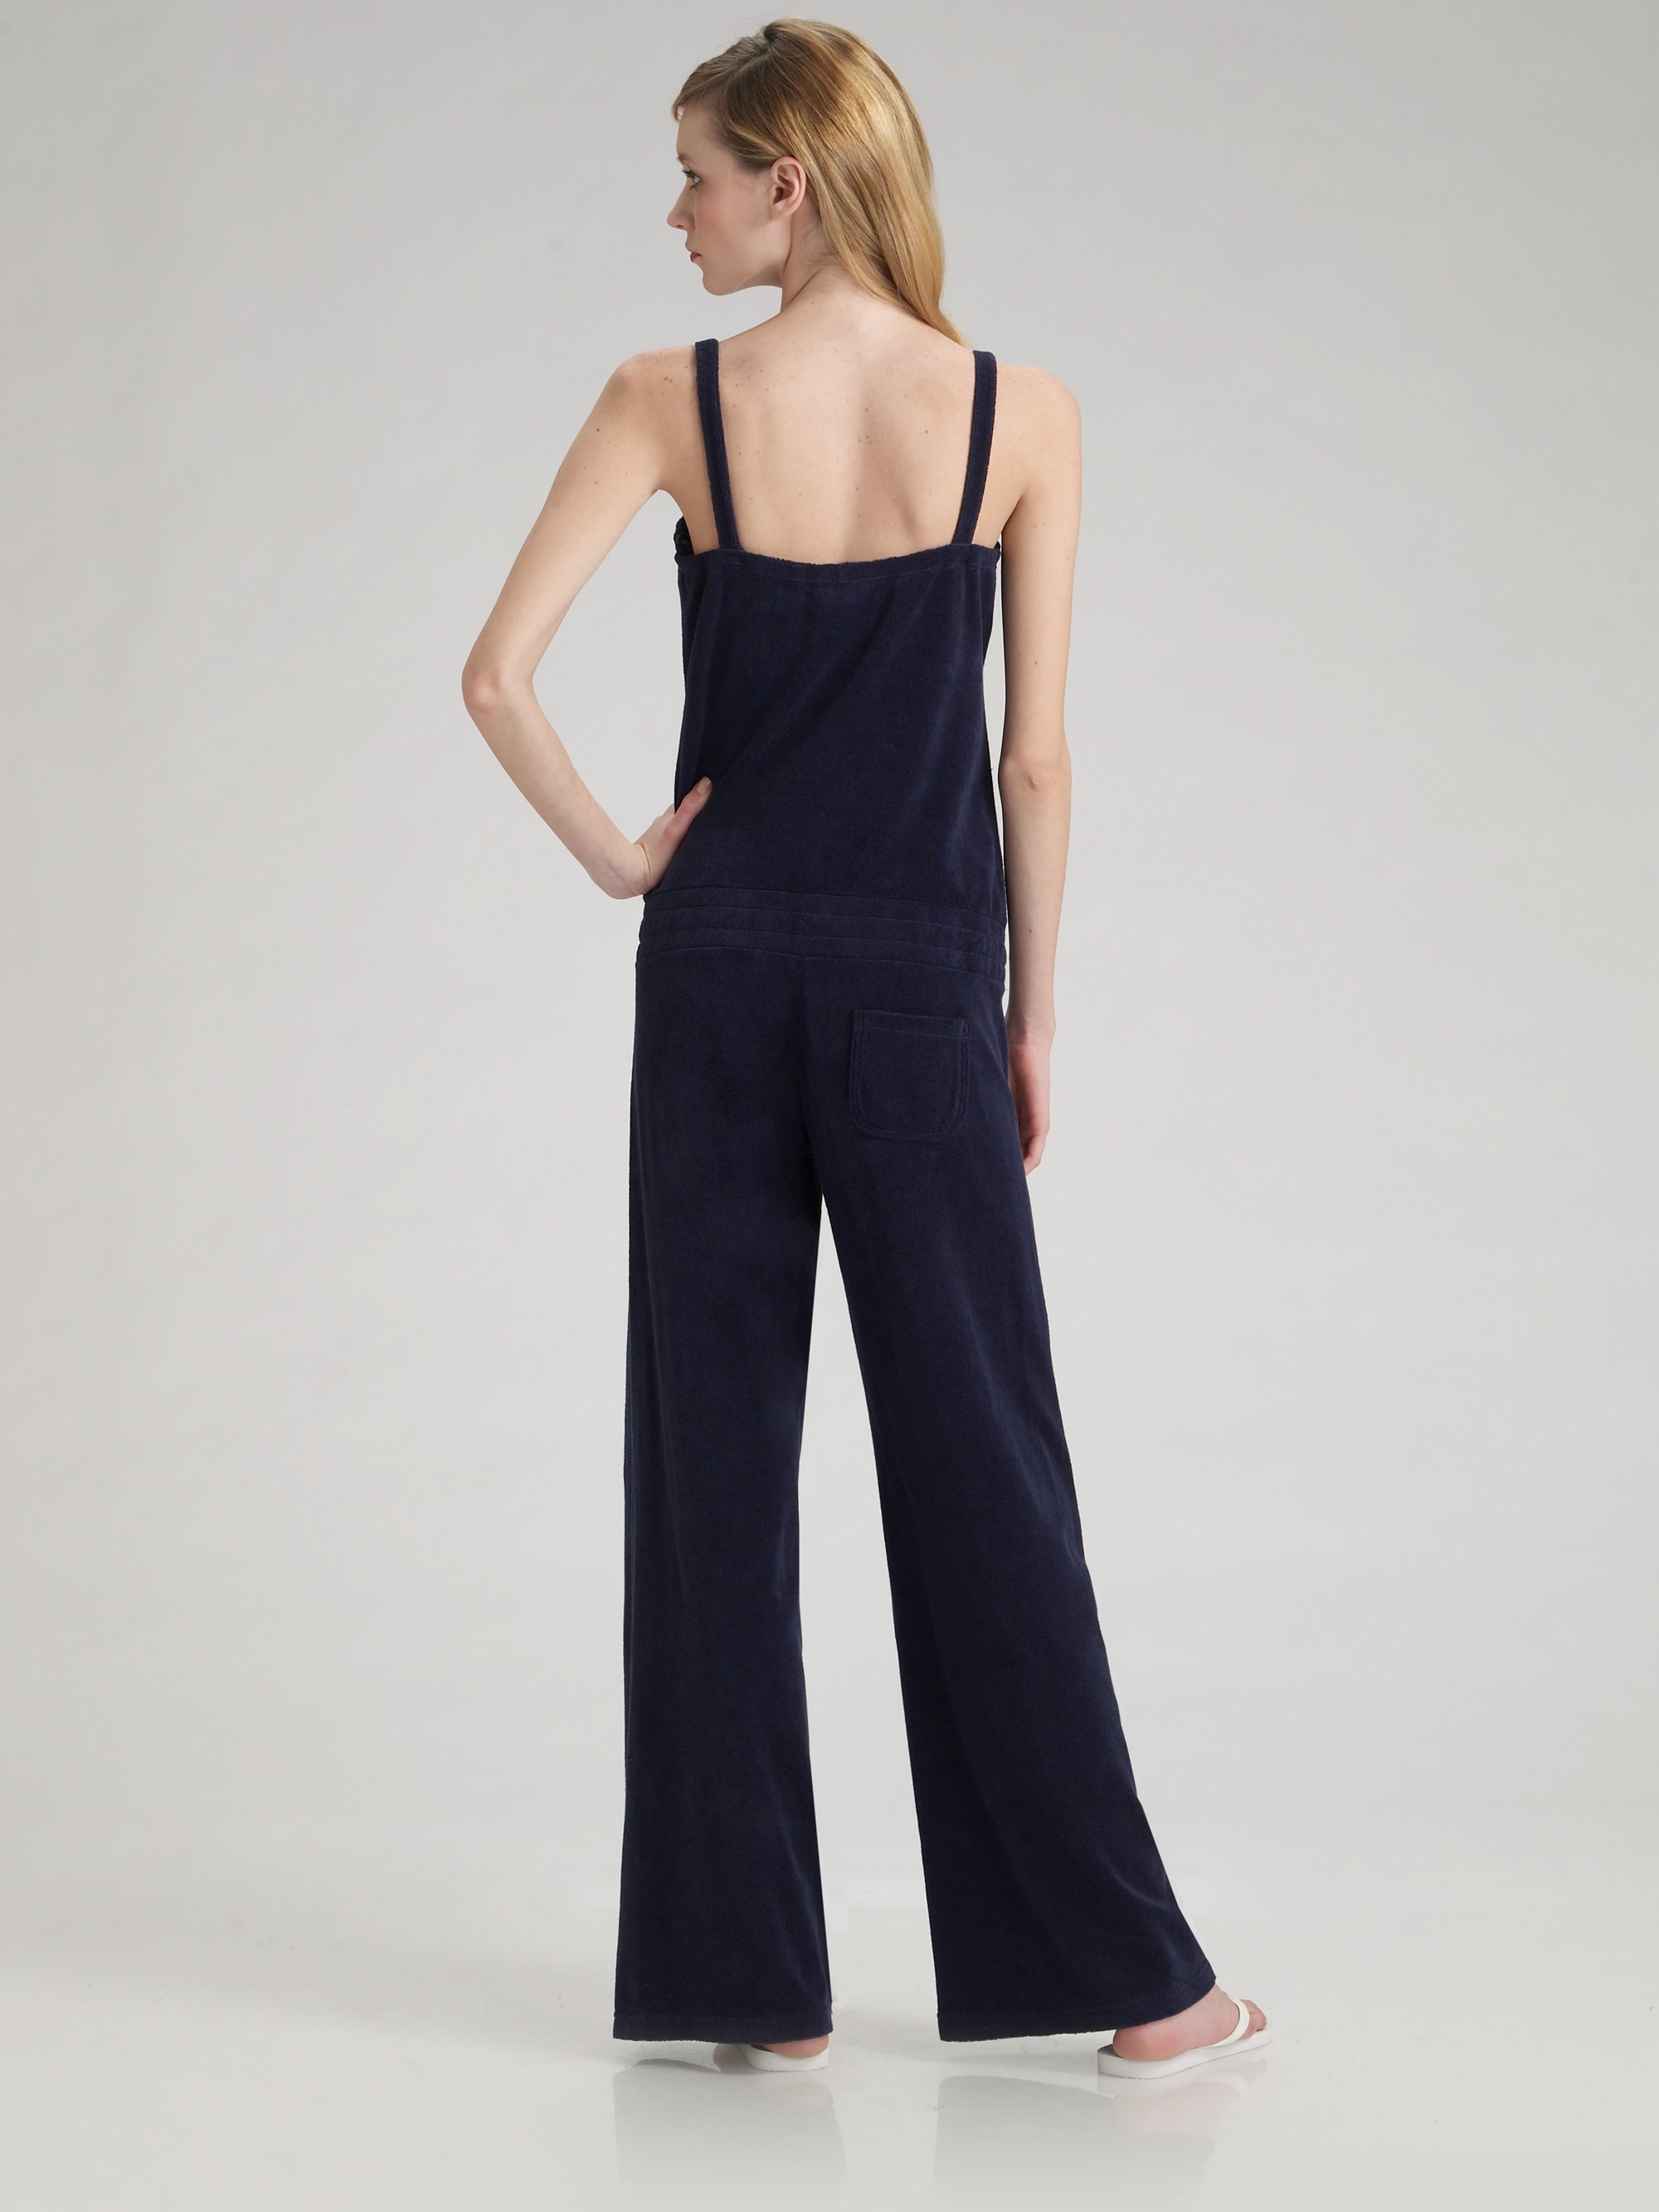 Juicy couture Wideleg Terry Jumpsuit in Blue | Lyst